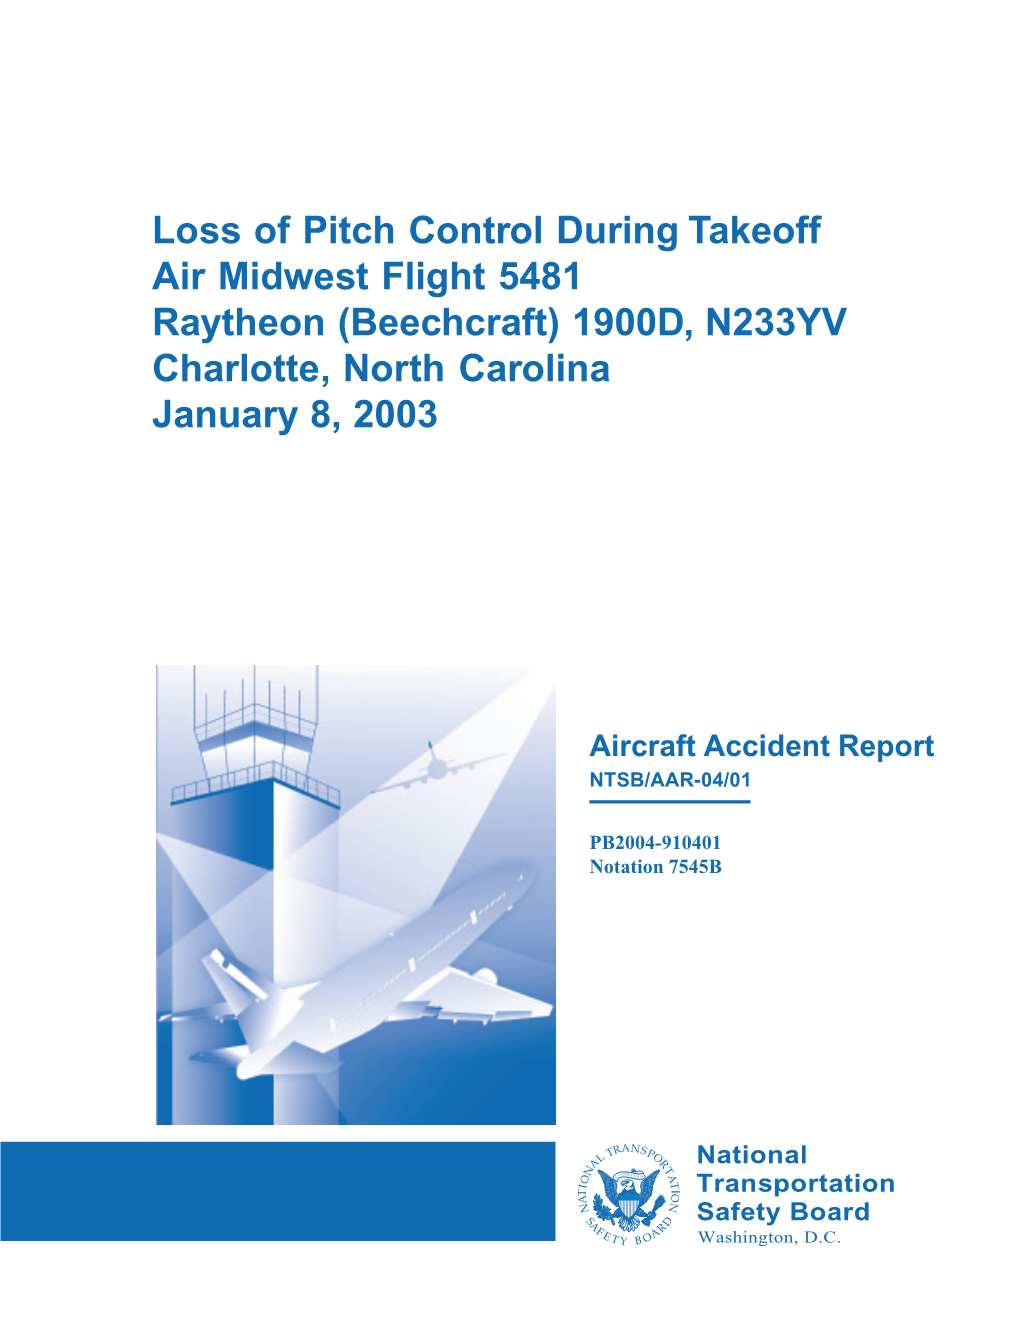 Loss of Pitch Control During Takeoff Air Midwest Flight 5481 Raytheon (Beechcraft) 1900D, N233YV Charlotte, North Carolina January 8, 2003